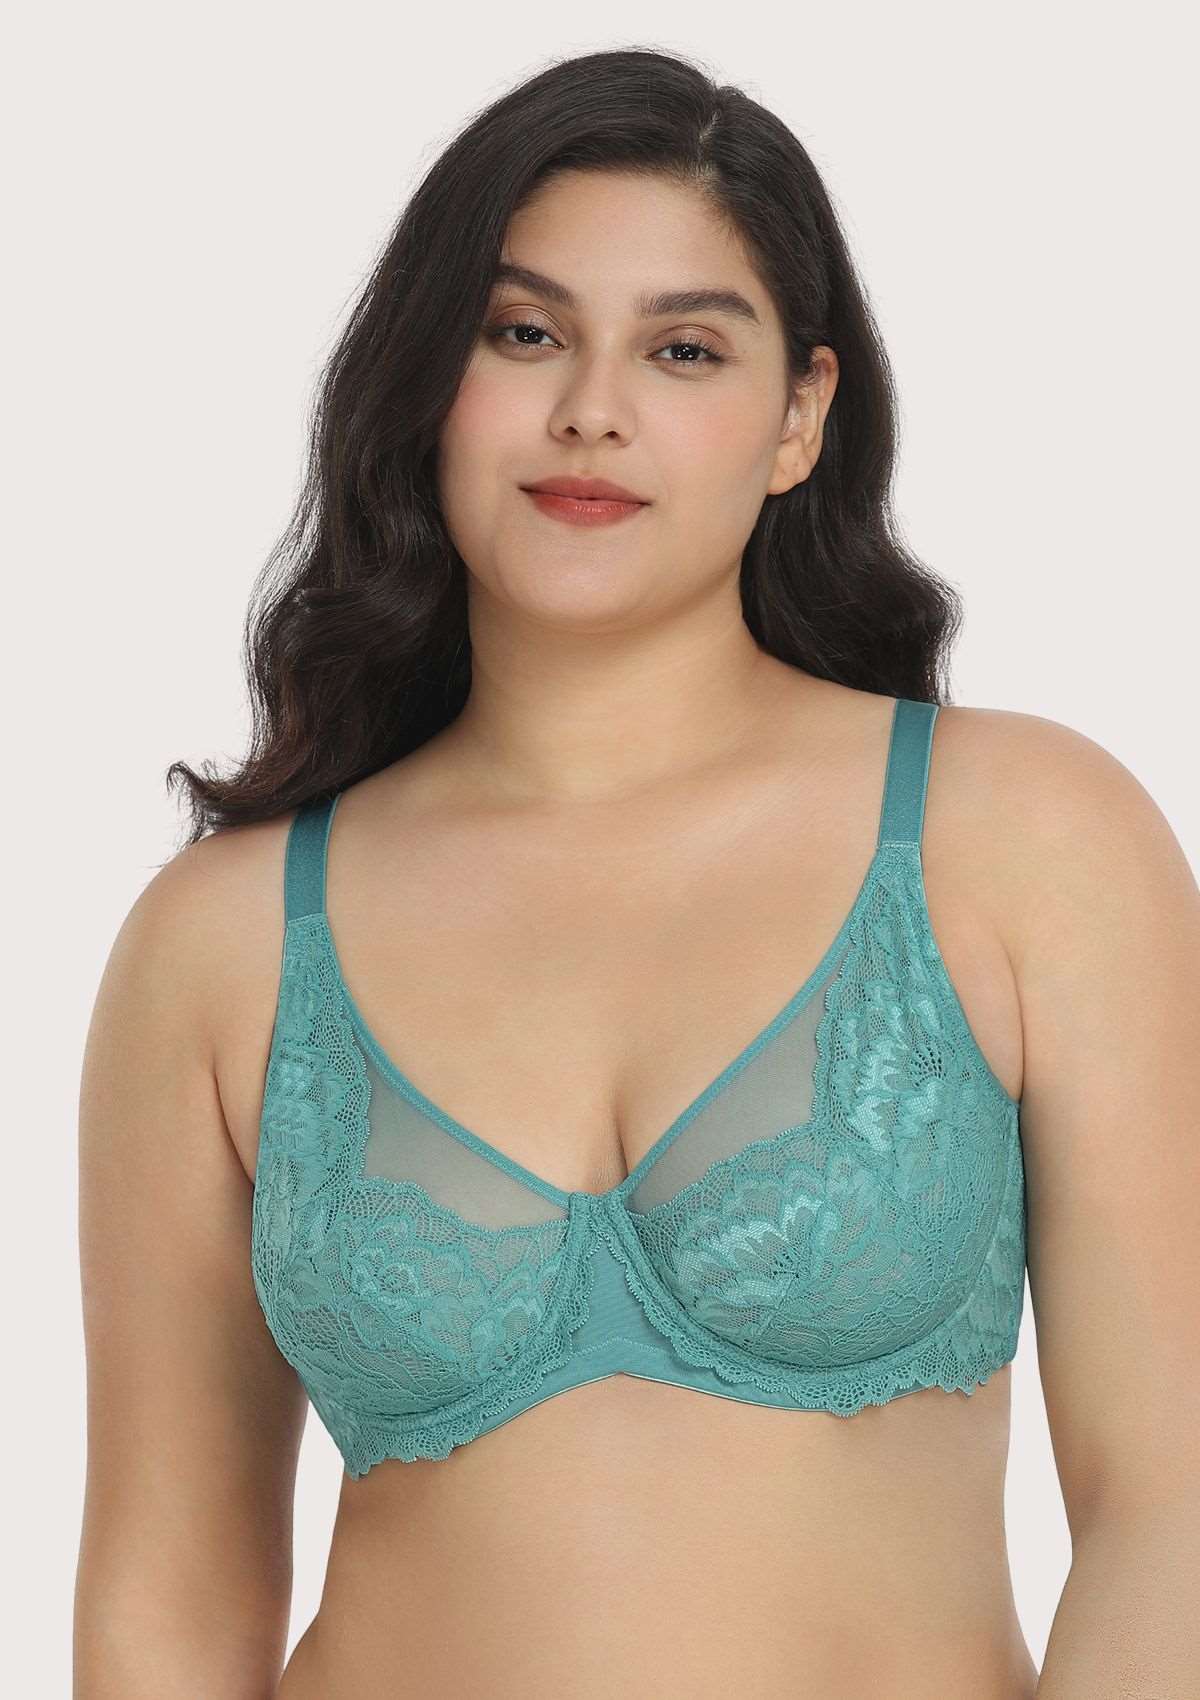 HSIA Paeonia Lace Full Coverage Underwire Non-Padded Uplifting Bra - Purple / 36 / C